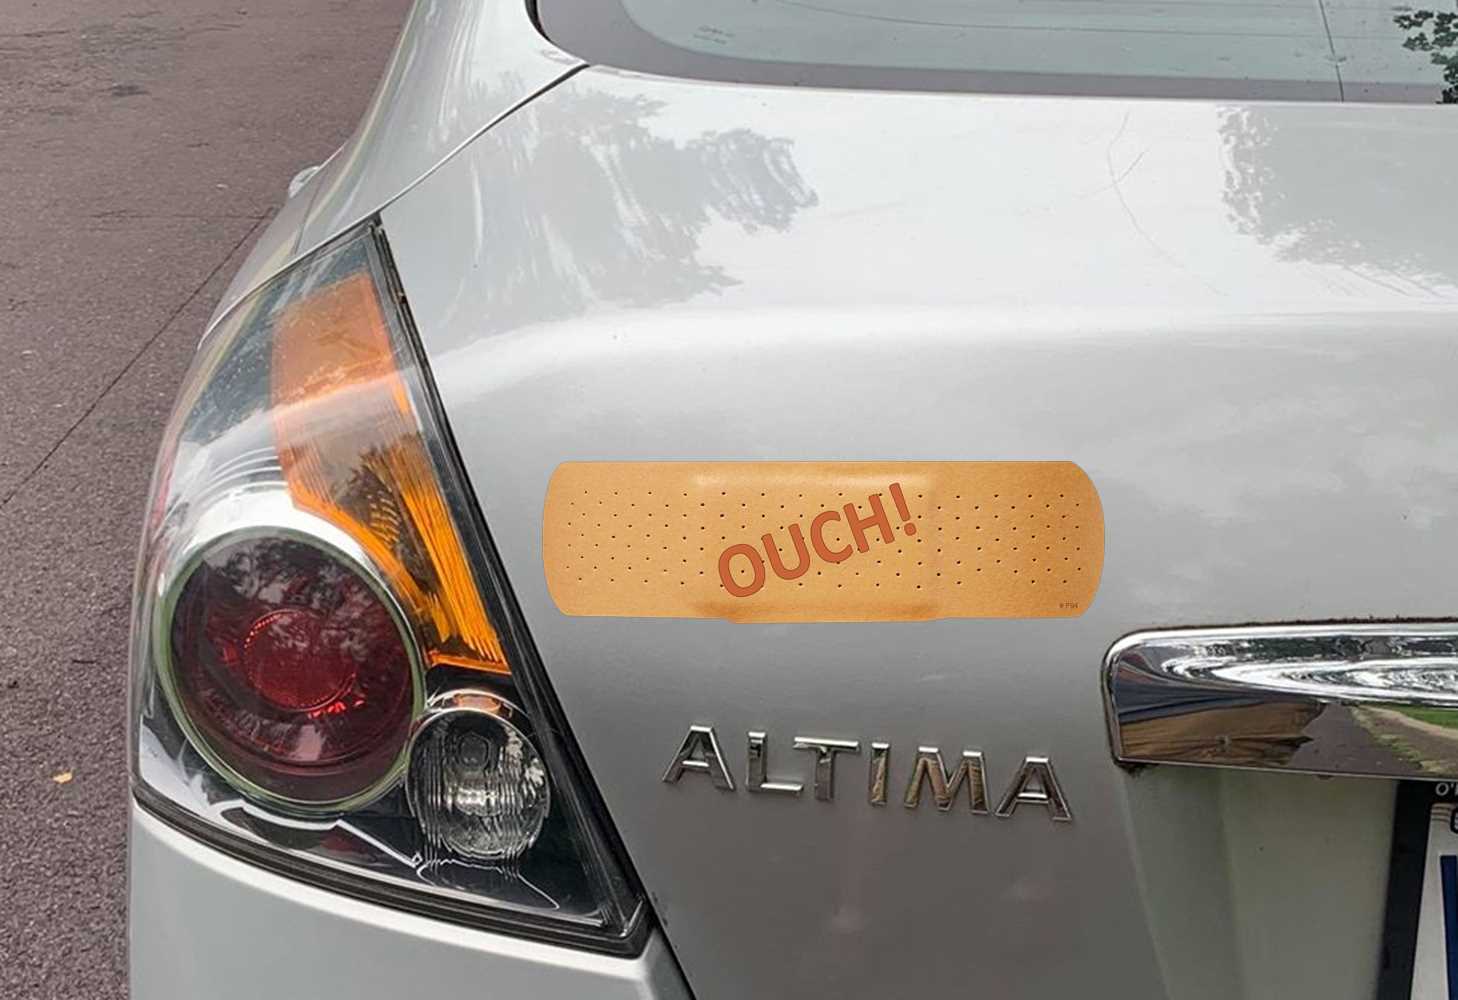 ouch band aid bumper sticker in hand